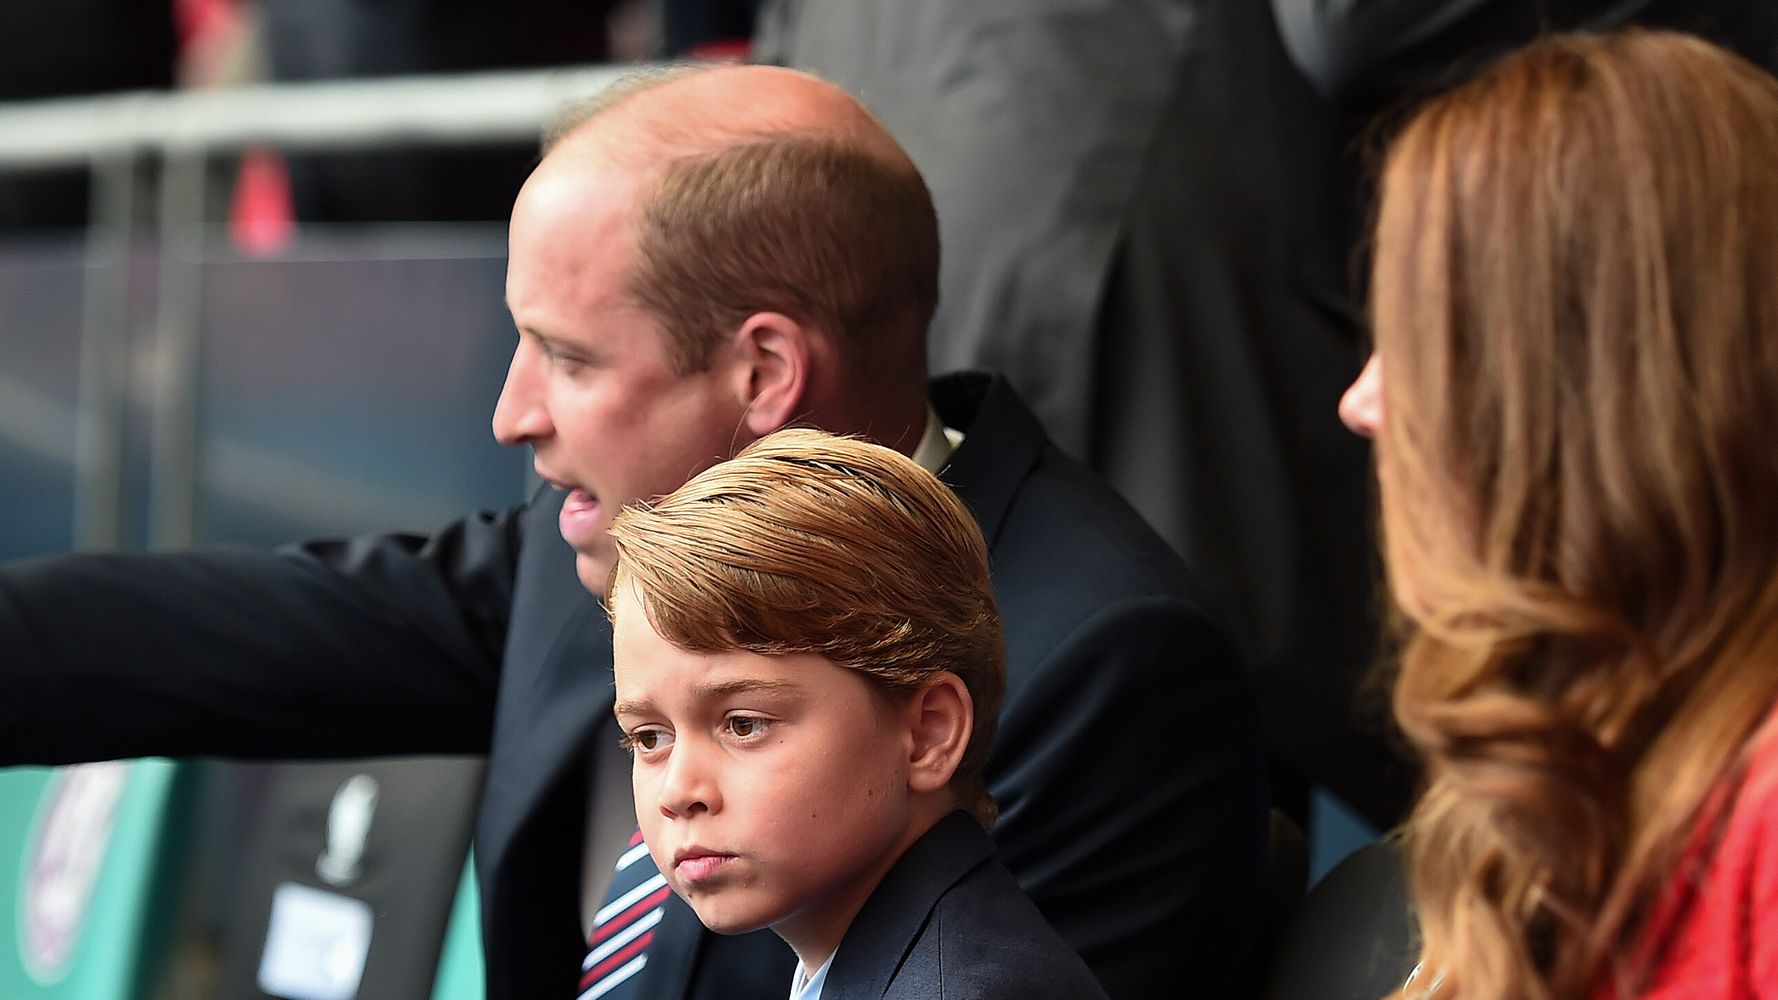 Prince George Wears Suit And Tie For A Soccer Outing With His Mom And Dad